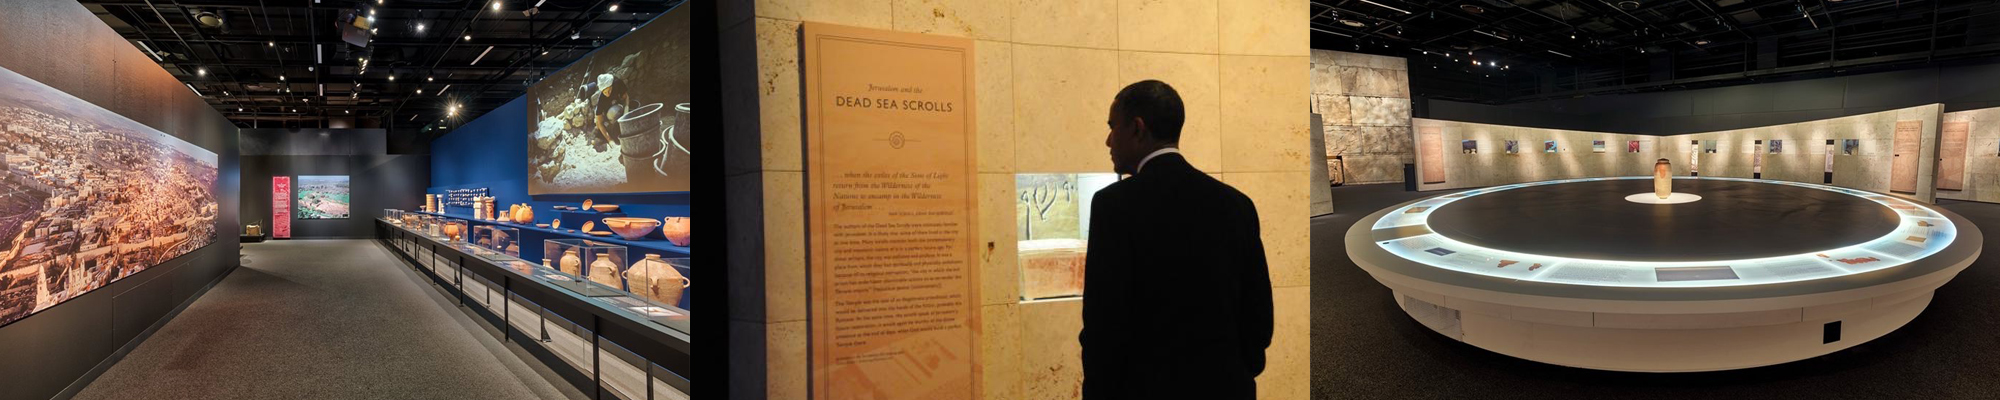 Dead Sea Scrolls Exhibit collage: room of exhibit, President Obama viewing display, another room of exhibit 